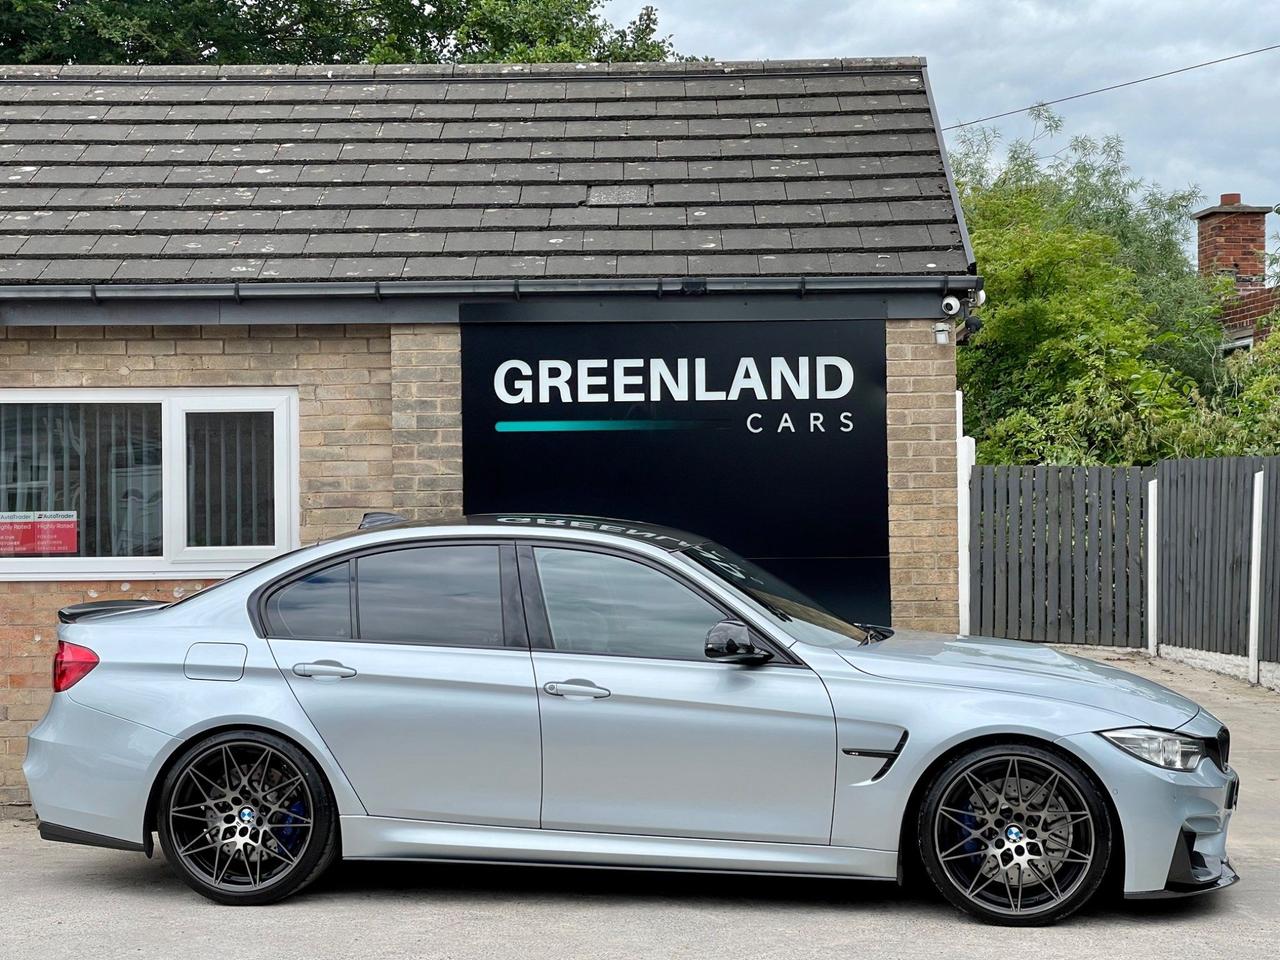 Used 2016 BMW M3 for sale in Sheffield